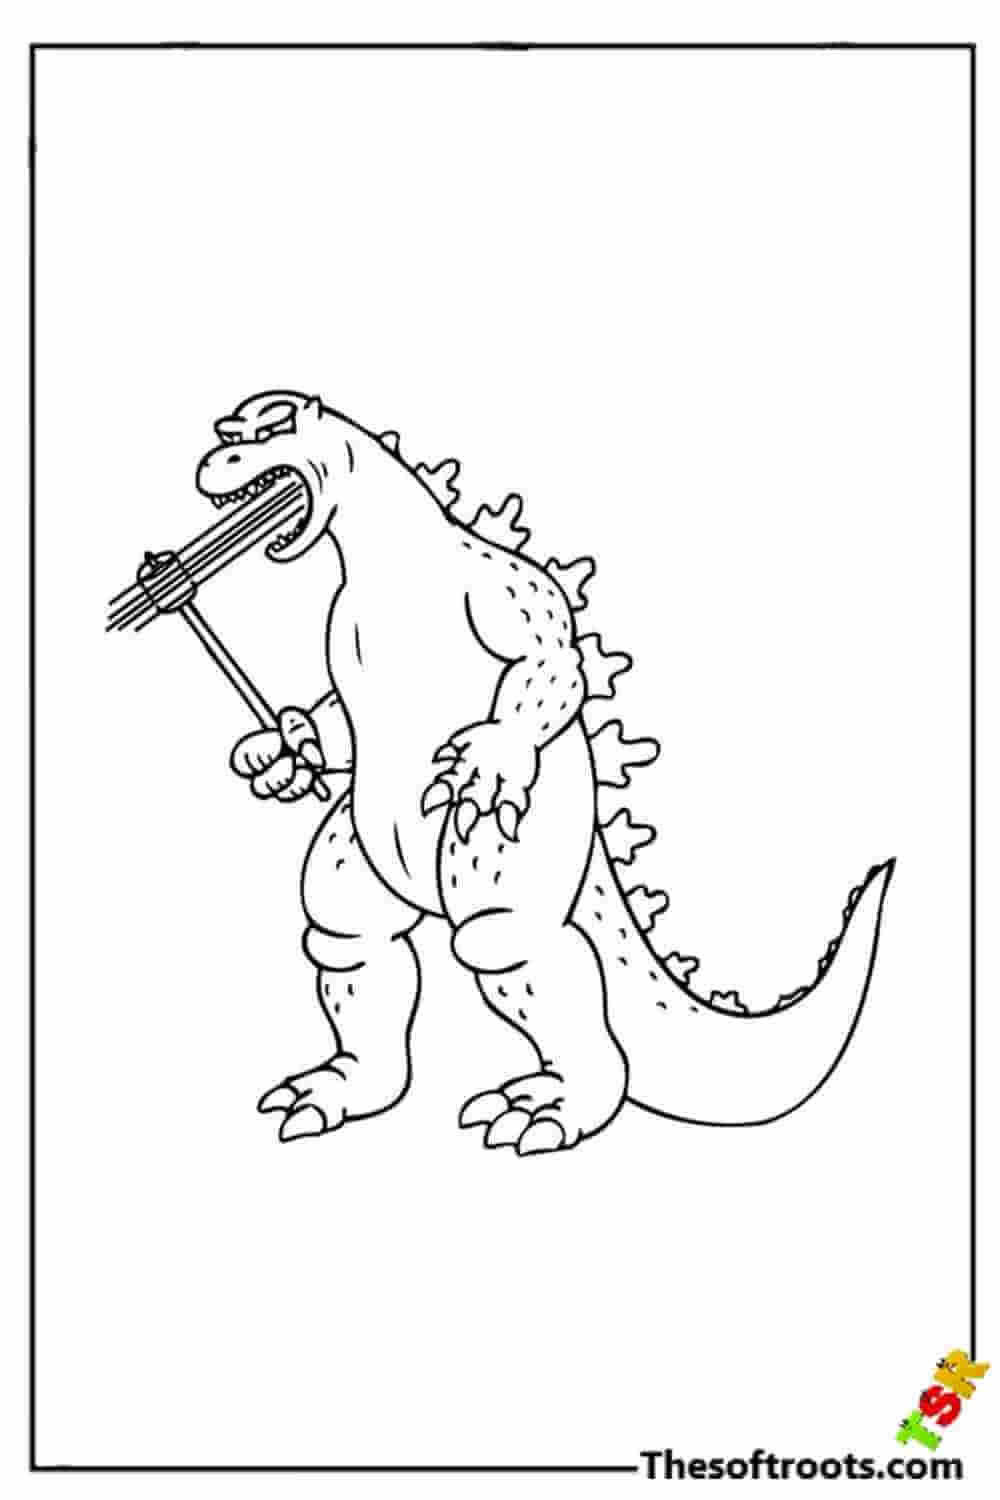 Godzilla is funny coloring pages